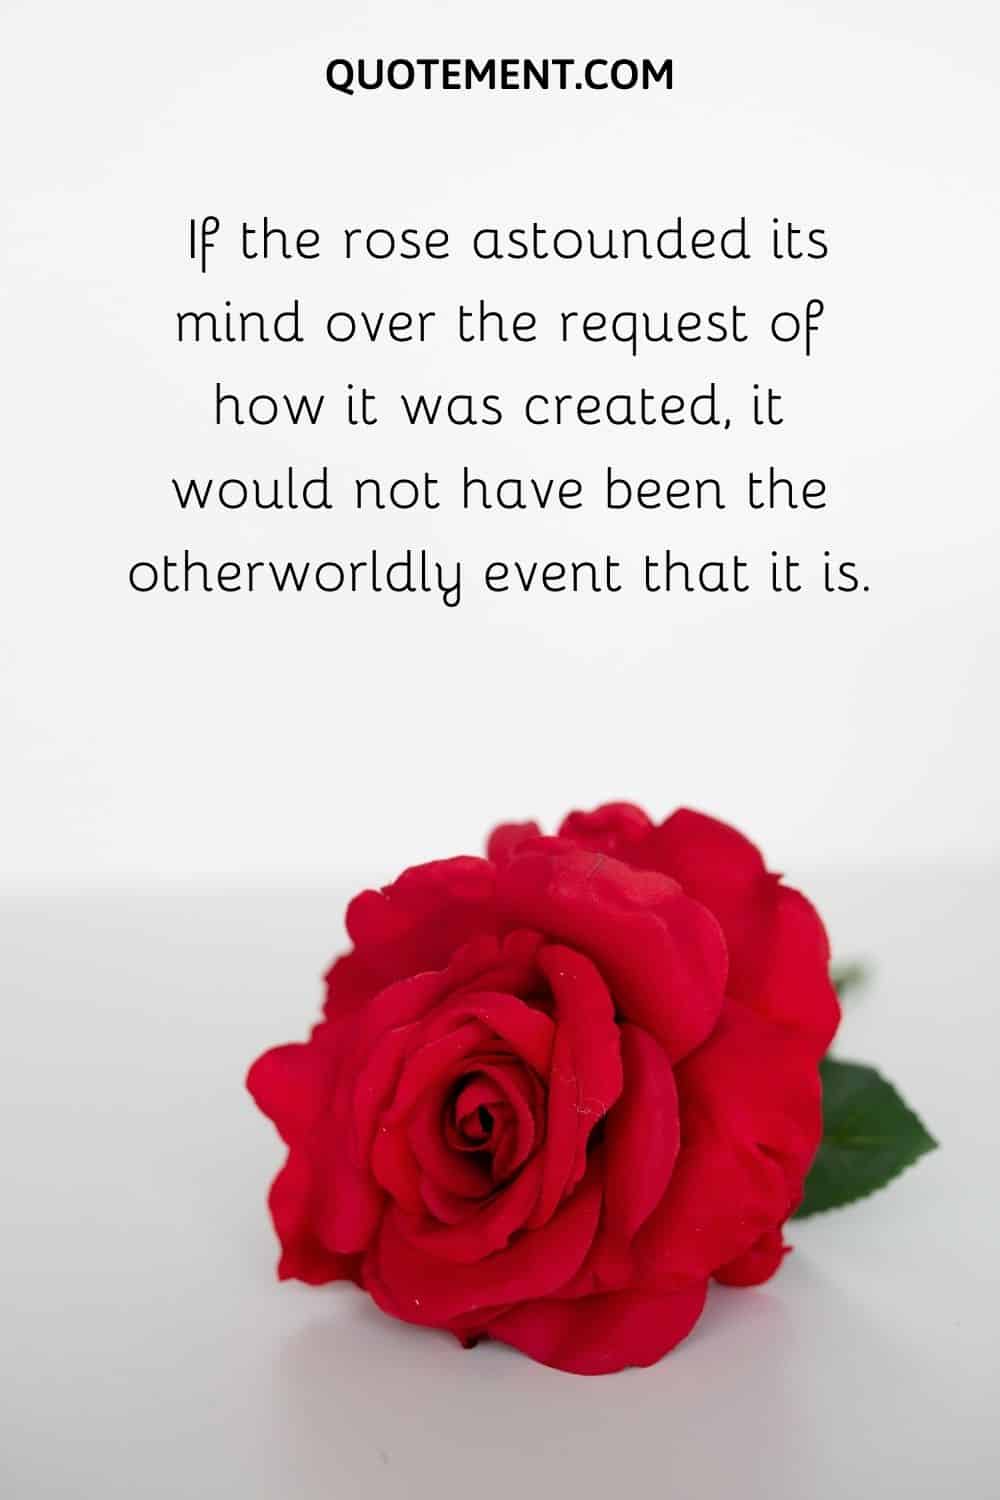 If the rose astounded its mind over the request of how it was created, it would not have been the otherworldly event that it is.